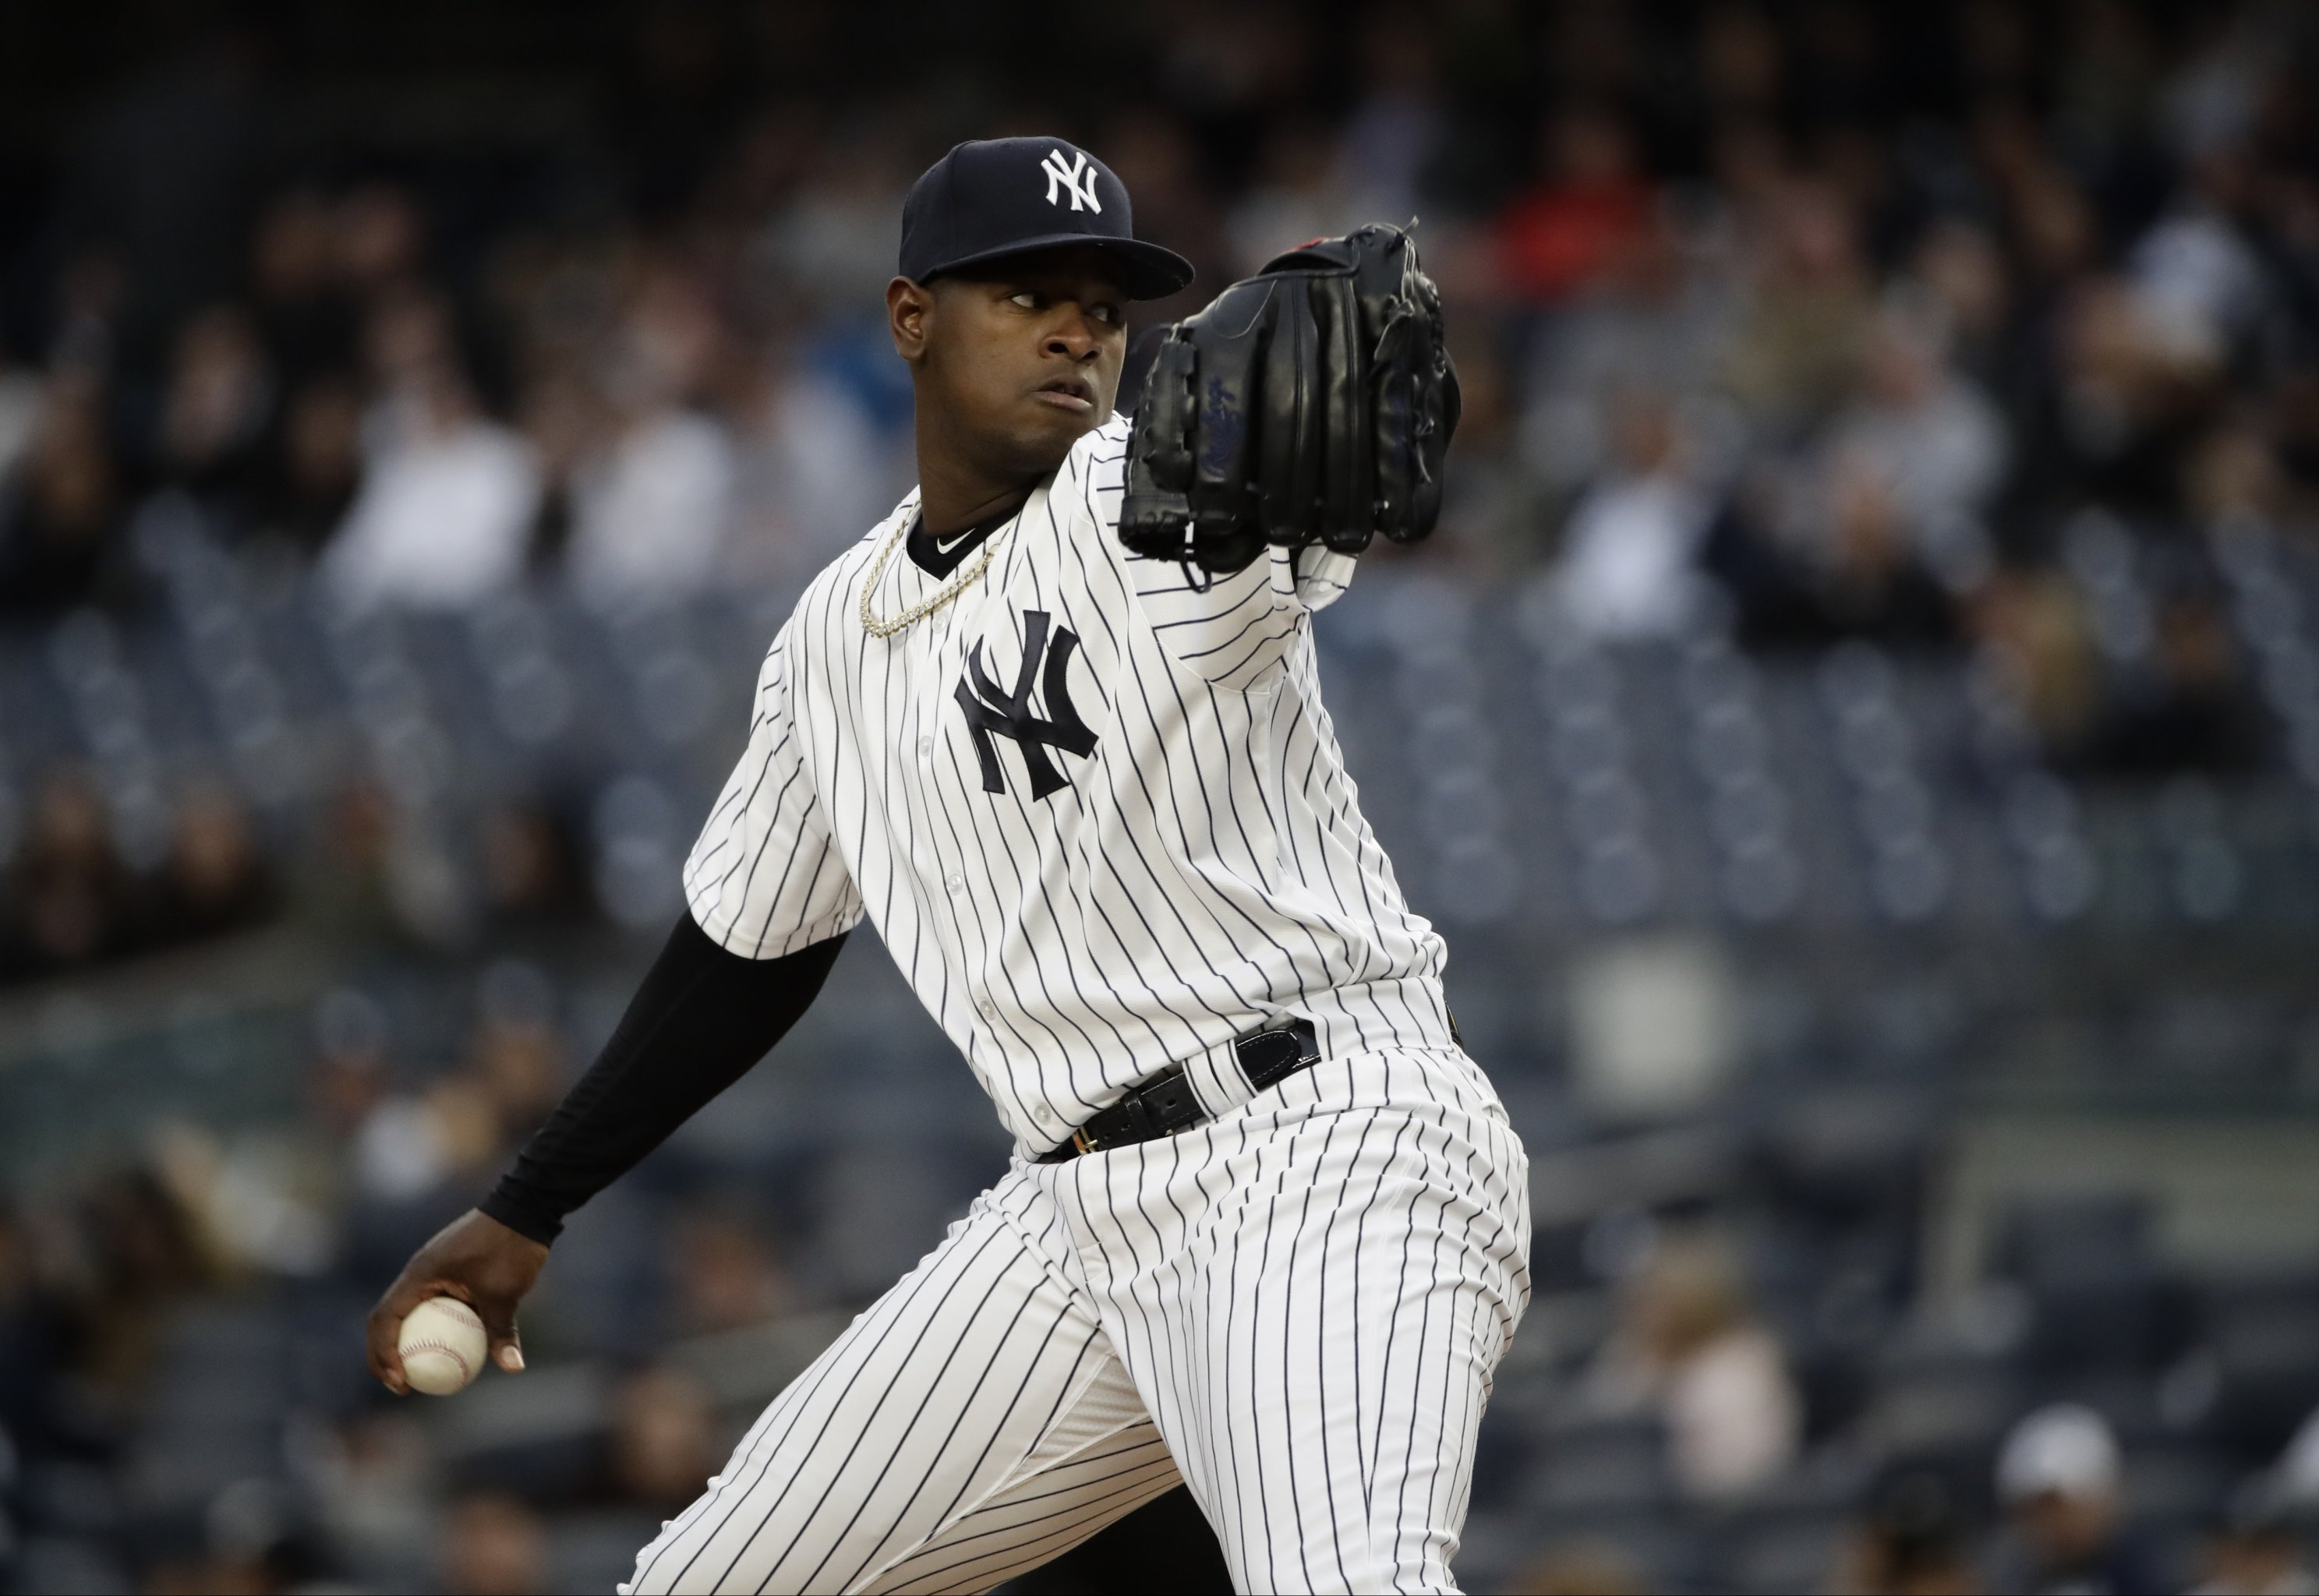 Luis Severino on X: Great team win today let's keeping going boys